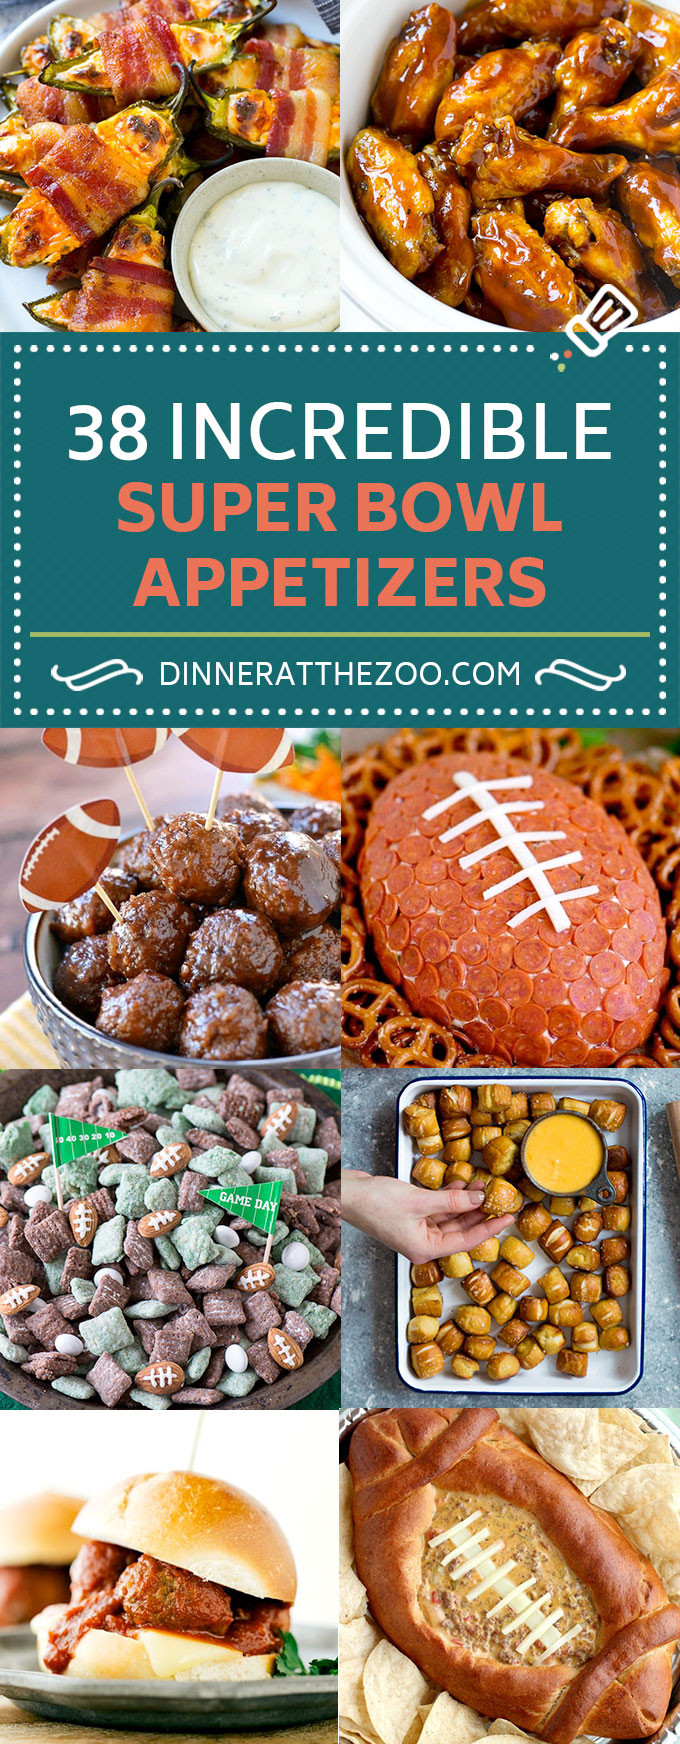 Best Super Bowl Party Recipes
 45 Incredible Super Bowl Appetizer Recipes Dinner at the Zoo